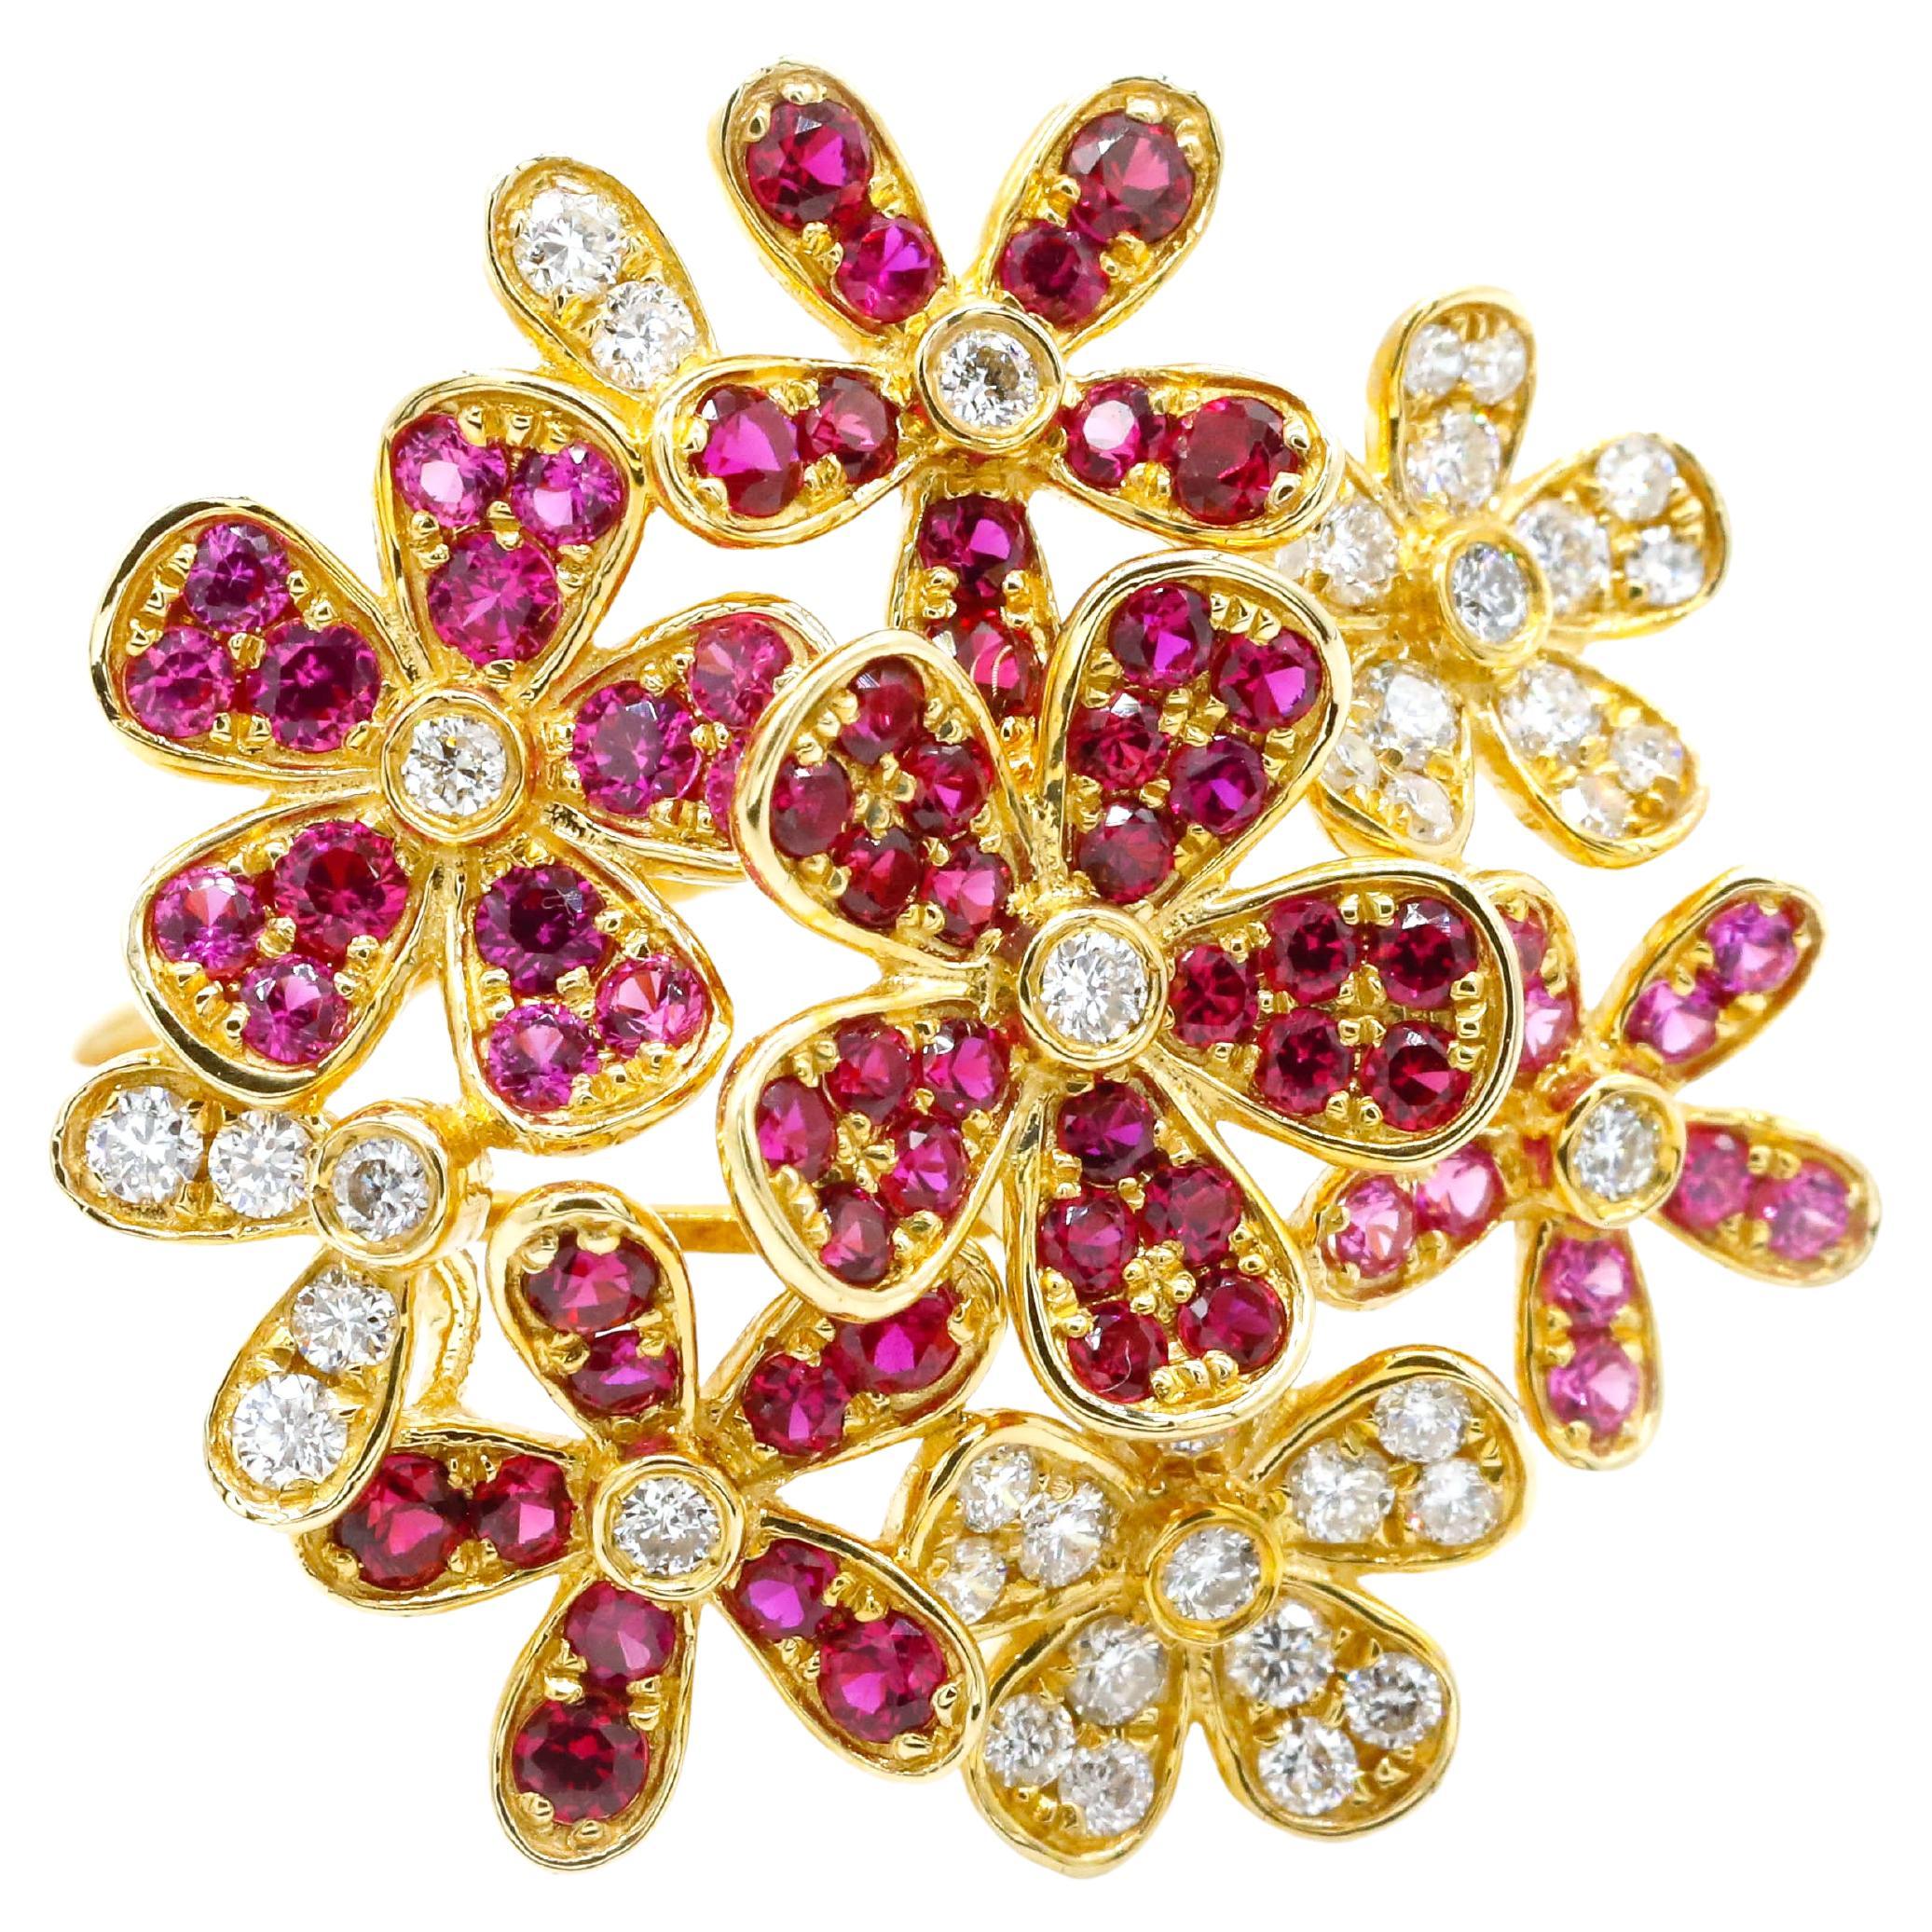 1.69 Ct Diamond Ruby Pink Sapphire Pave Flower 14K Yellow Gold Wrap Ring